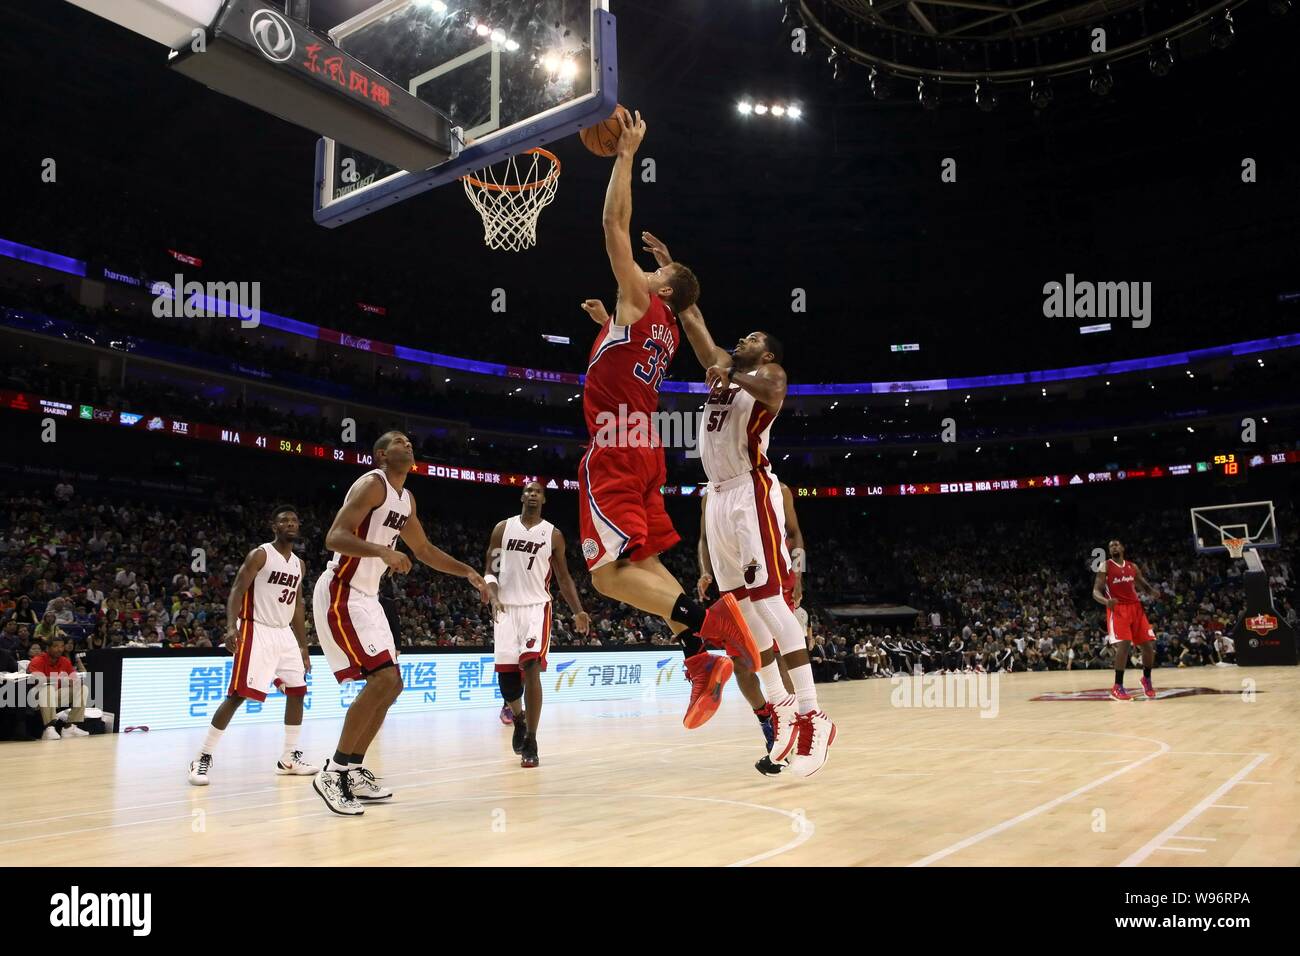 Blake Griffin of the Los Angeles Clippers, top, jumps to dunk against the Miami Heat during their second match of their NBA China Games in Shanghai, C Stock Photo